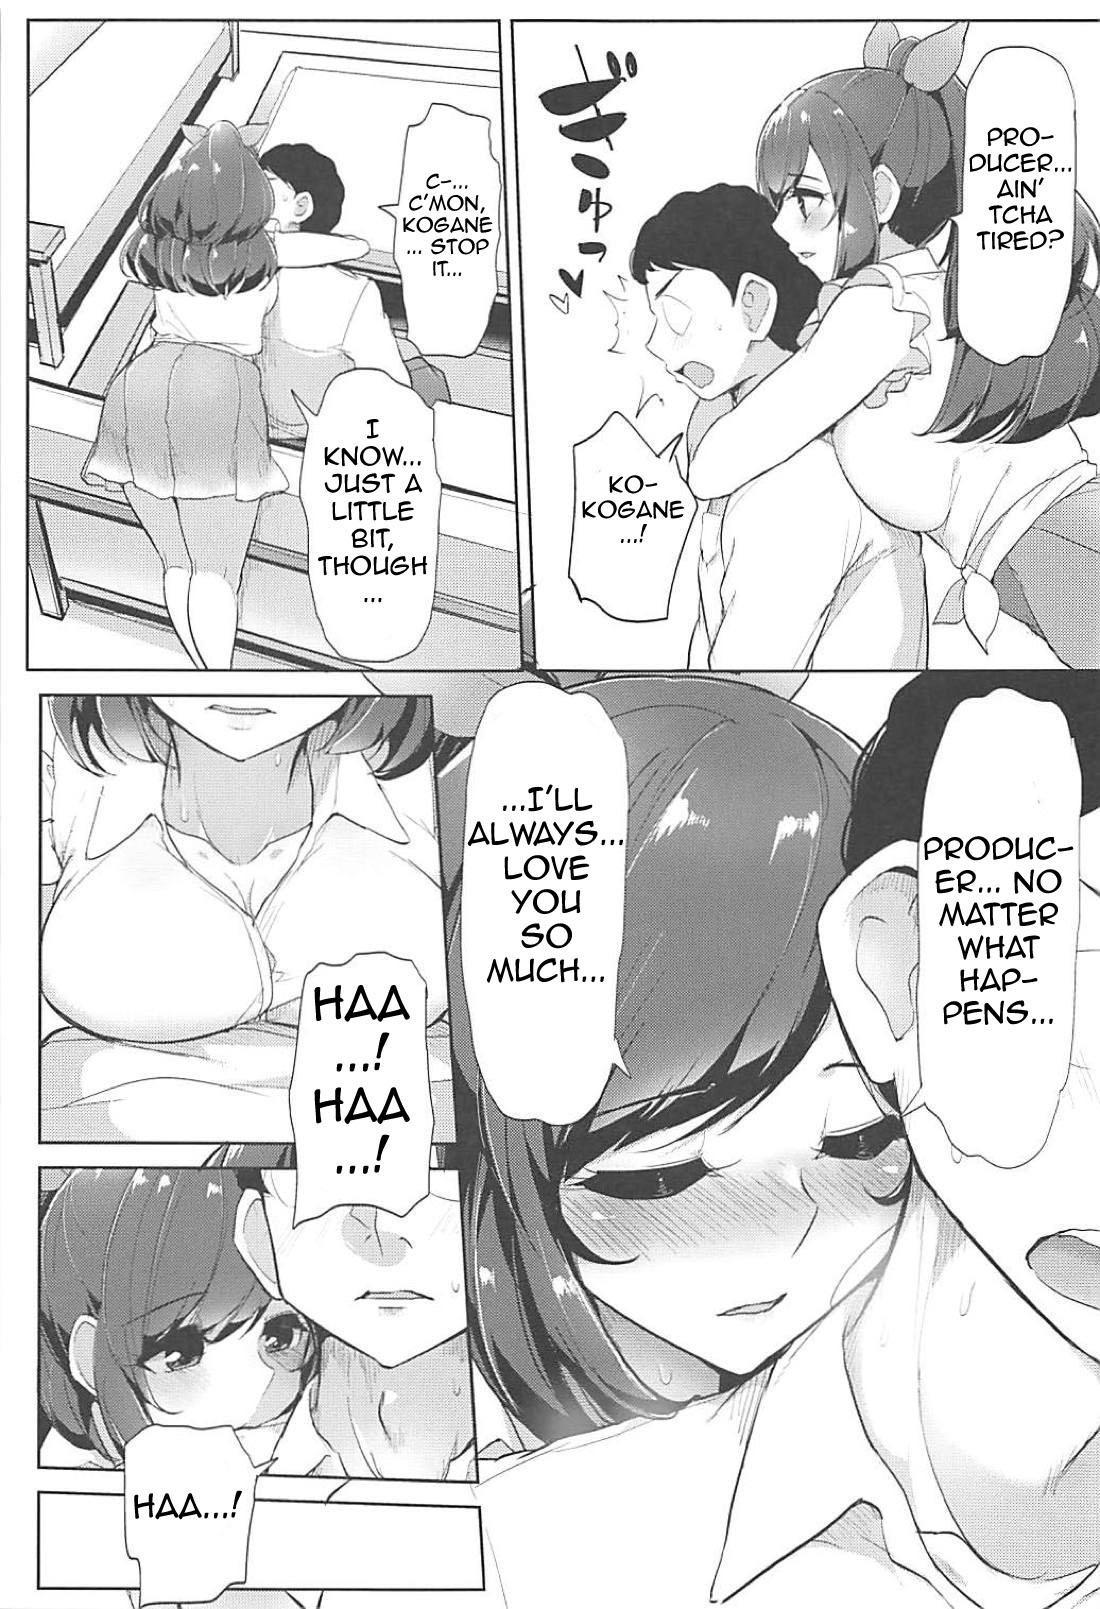 Groupfuck P e no Suki wa Tomeraren bai - When I Just Can't Stop Loving The Producer - The idolmaster One - Page 11